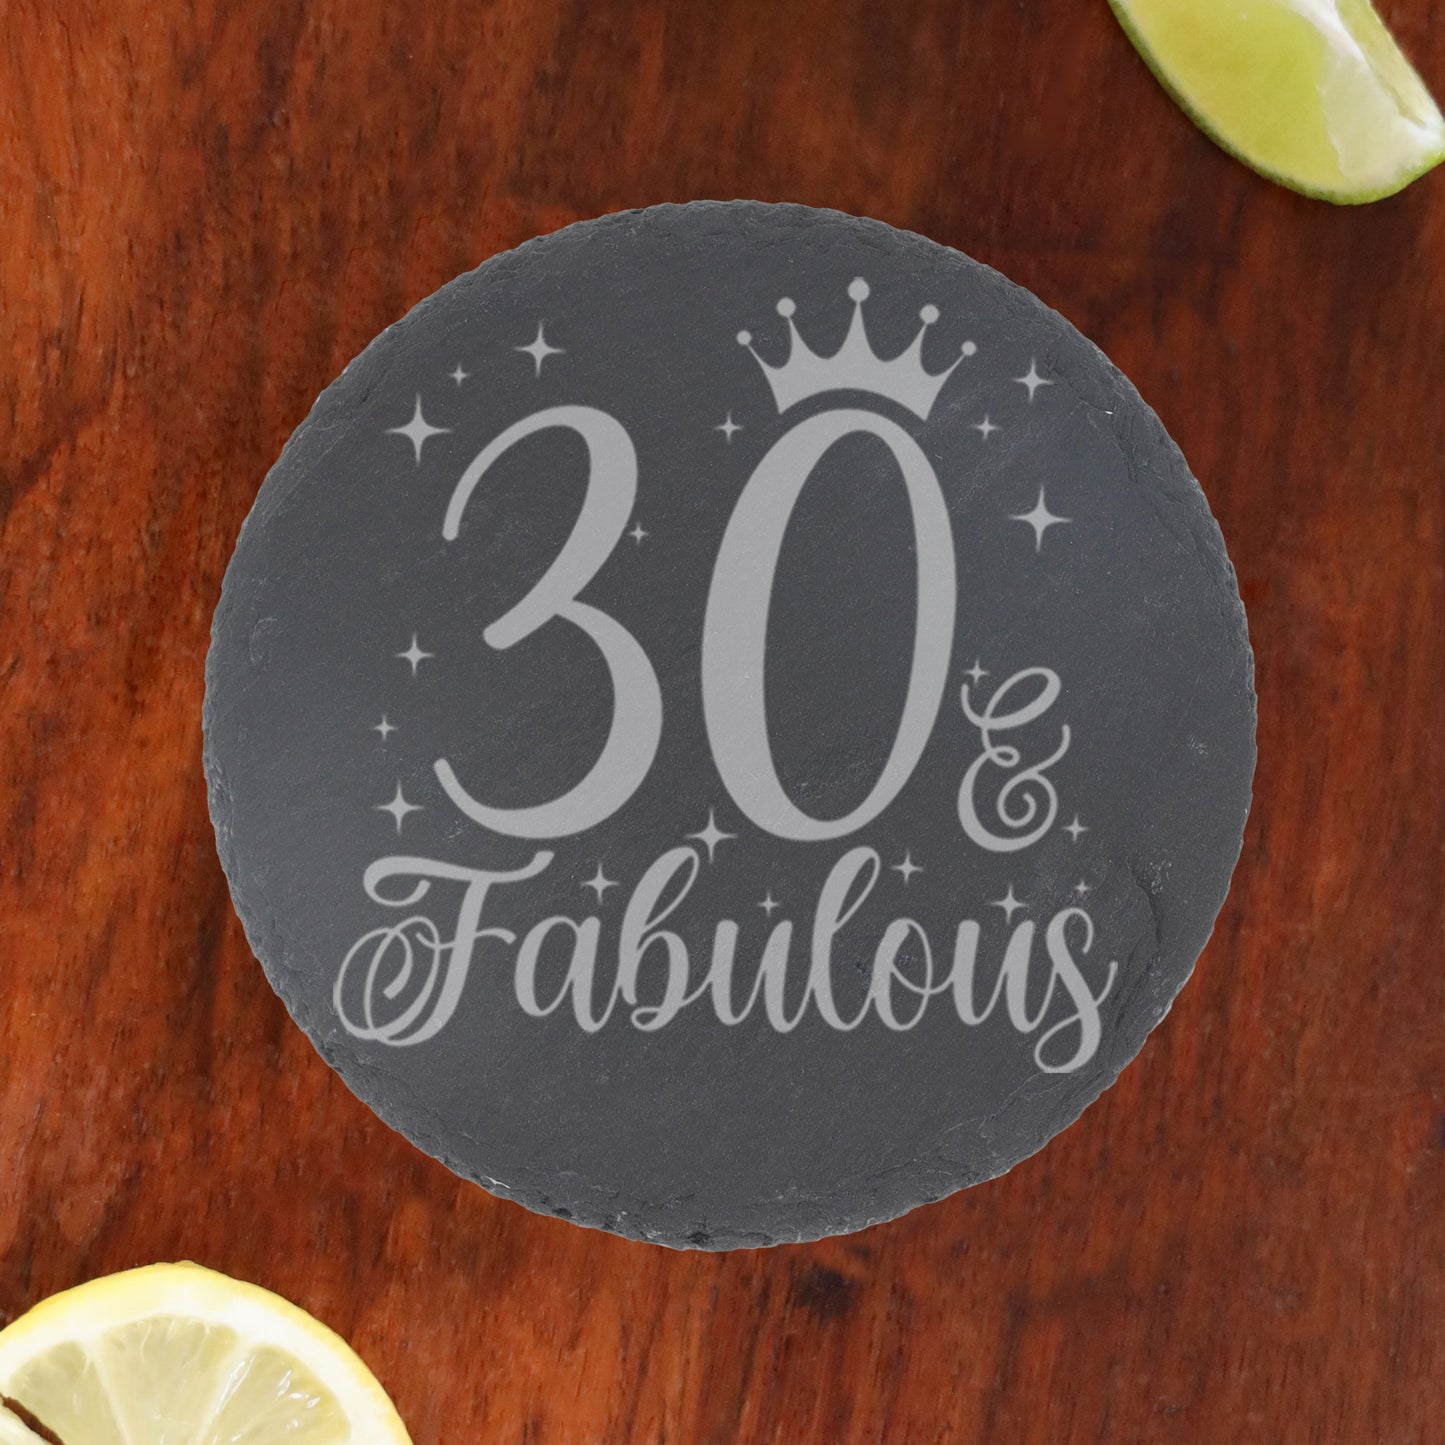 30 & Fabulous 30th Birthday Gift Engraved Wine Glass and/or Coaster Set  - Always Looking Good - Round Coaster Only  